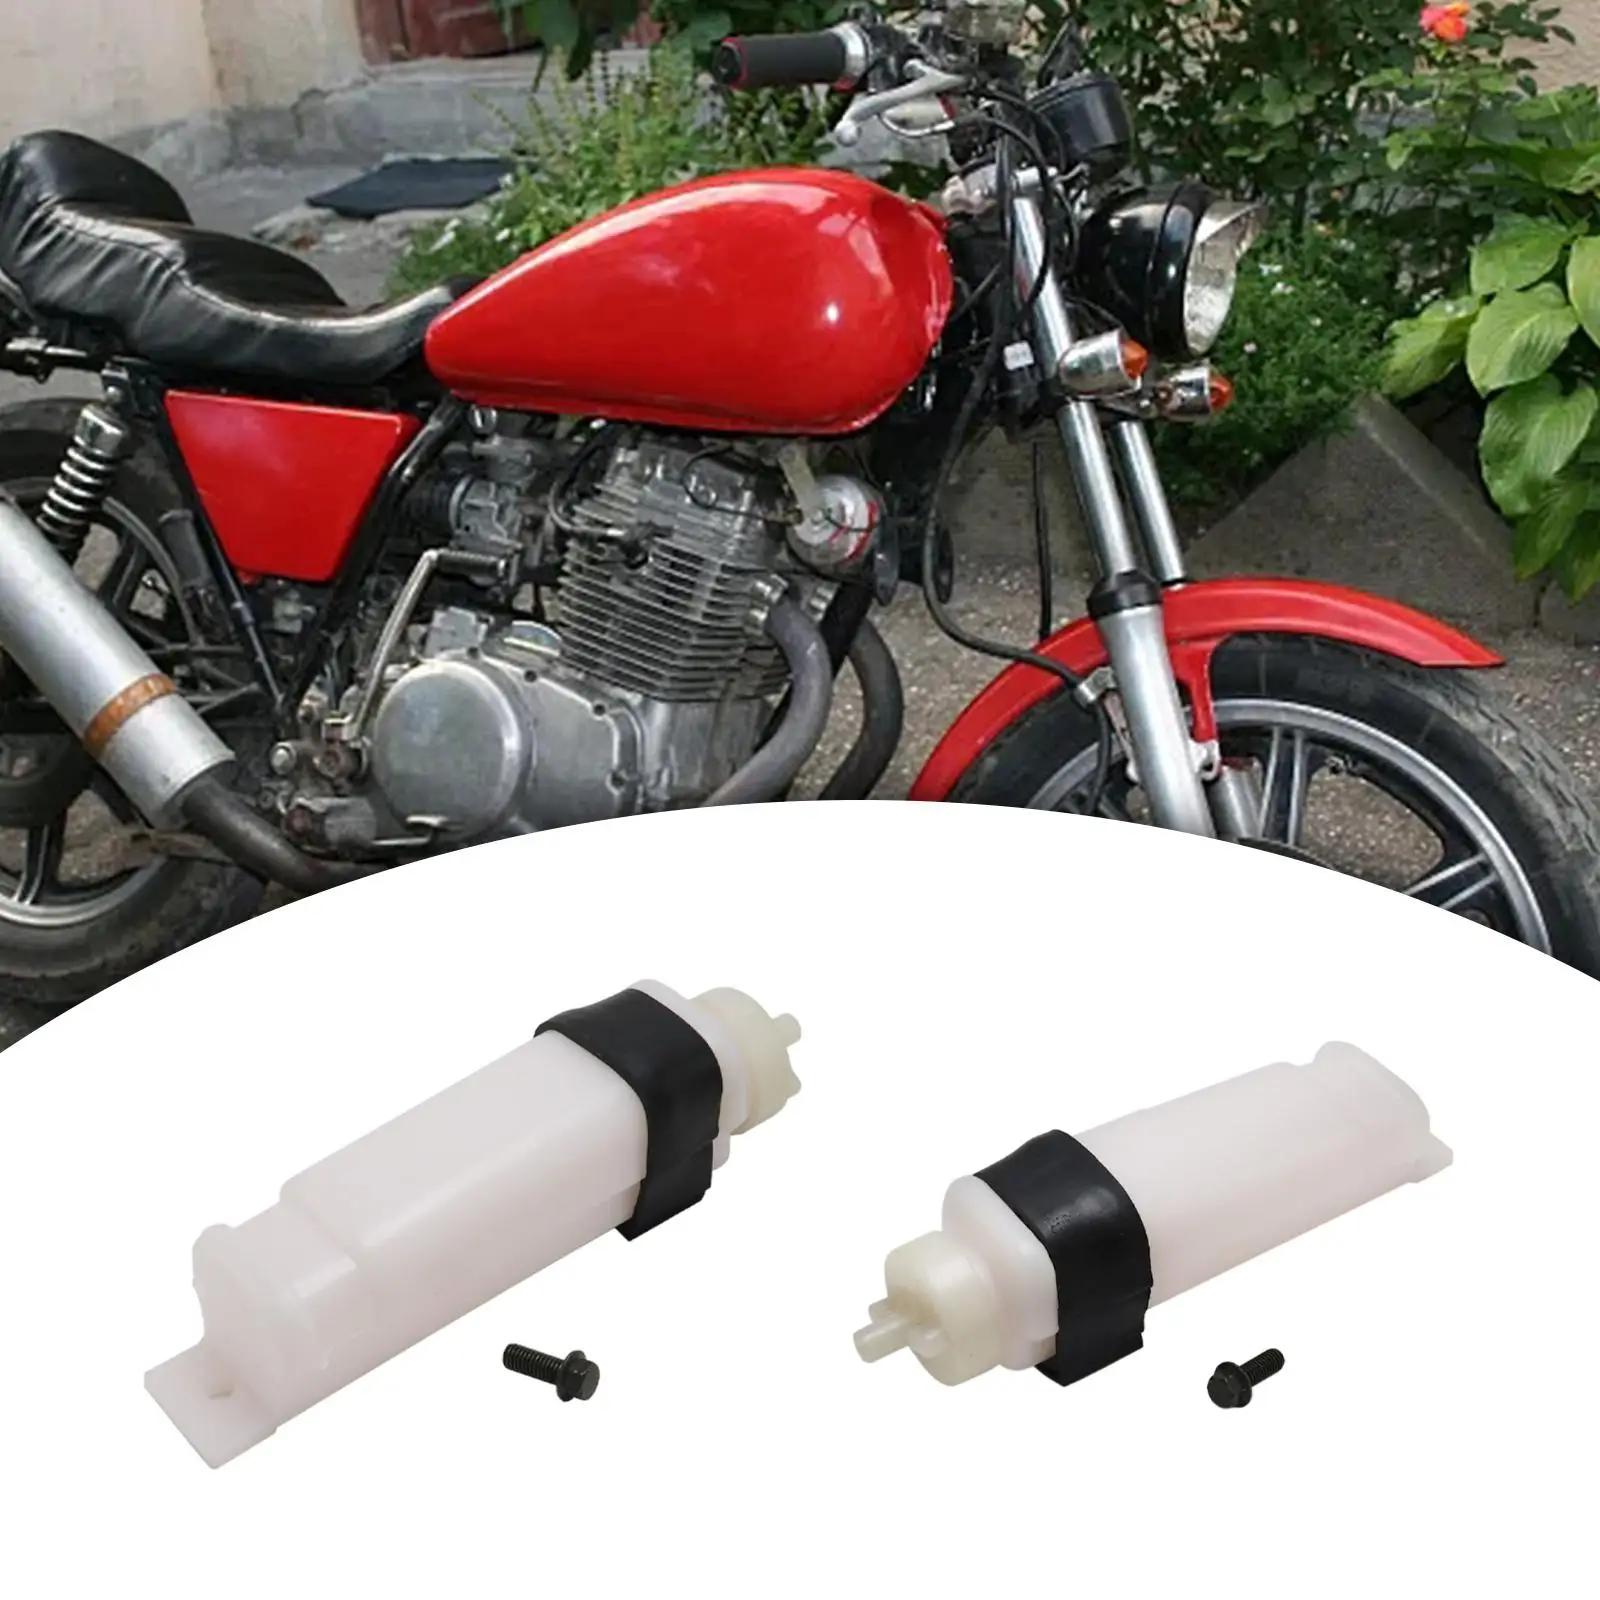 Cooling Water Tank Premium Motorcycle Engine Water Tank Motorcycle Accessories Parts Durable for Zongshen Motorcycle Lifan